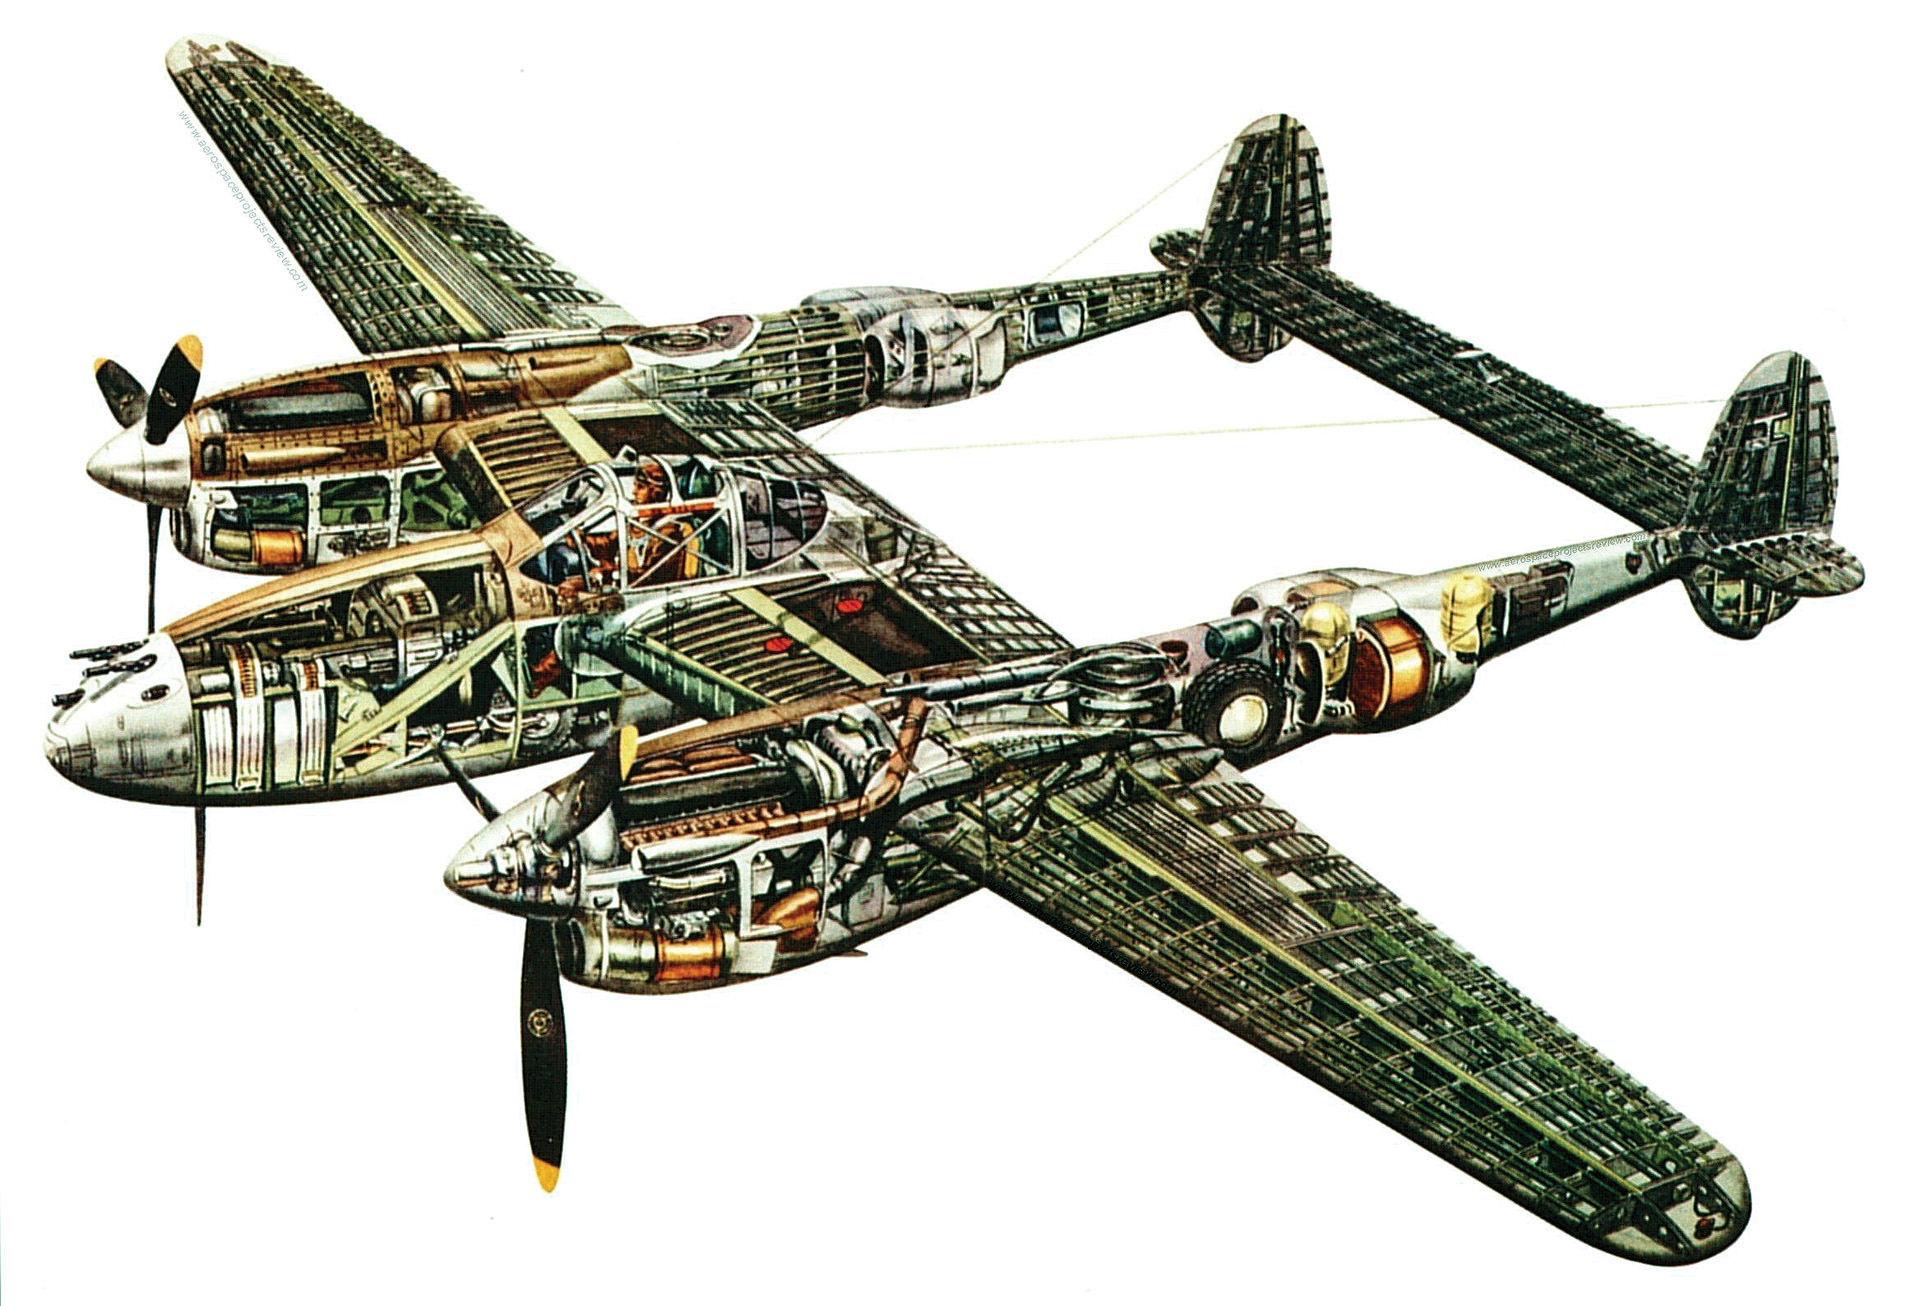 This cutaway view of the Lockheed P-38 Lightning fighter reveals its unique twin-boom construction and the arrangement of its nose-mounted armament, a deadly combination of a 20mm cannon with four .50-caliber machine guns.  The P-38 was an excellent fighter bomber, capable of carrying a bomb load and rockets.